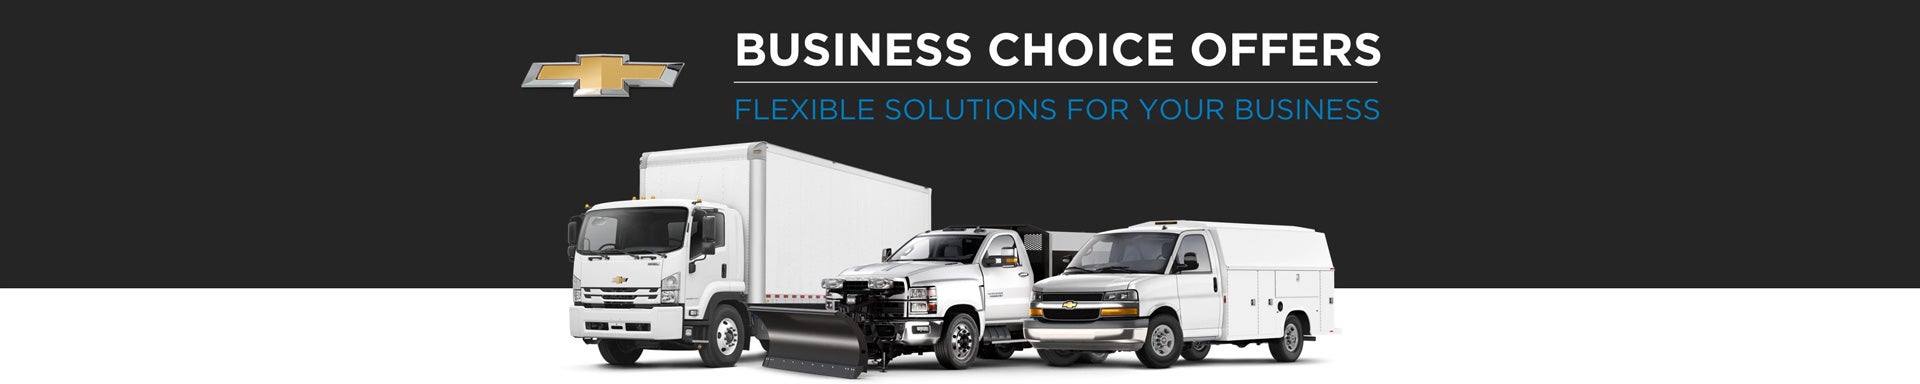 Chevrolet Business Choice Offers - Flexible Solutions for your Business - Andy Mohr Chevrolet in Plainfield IN